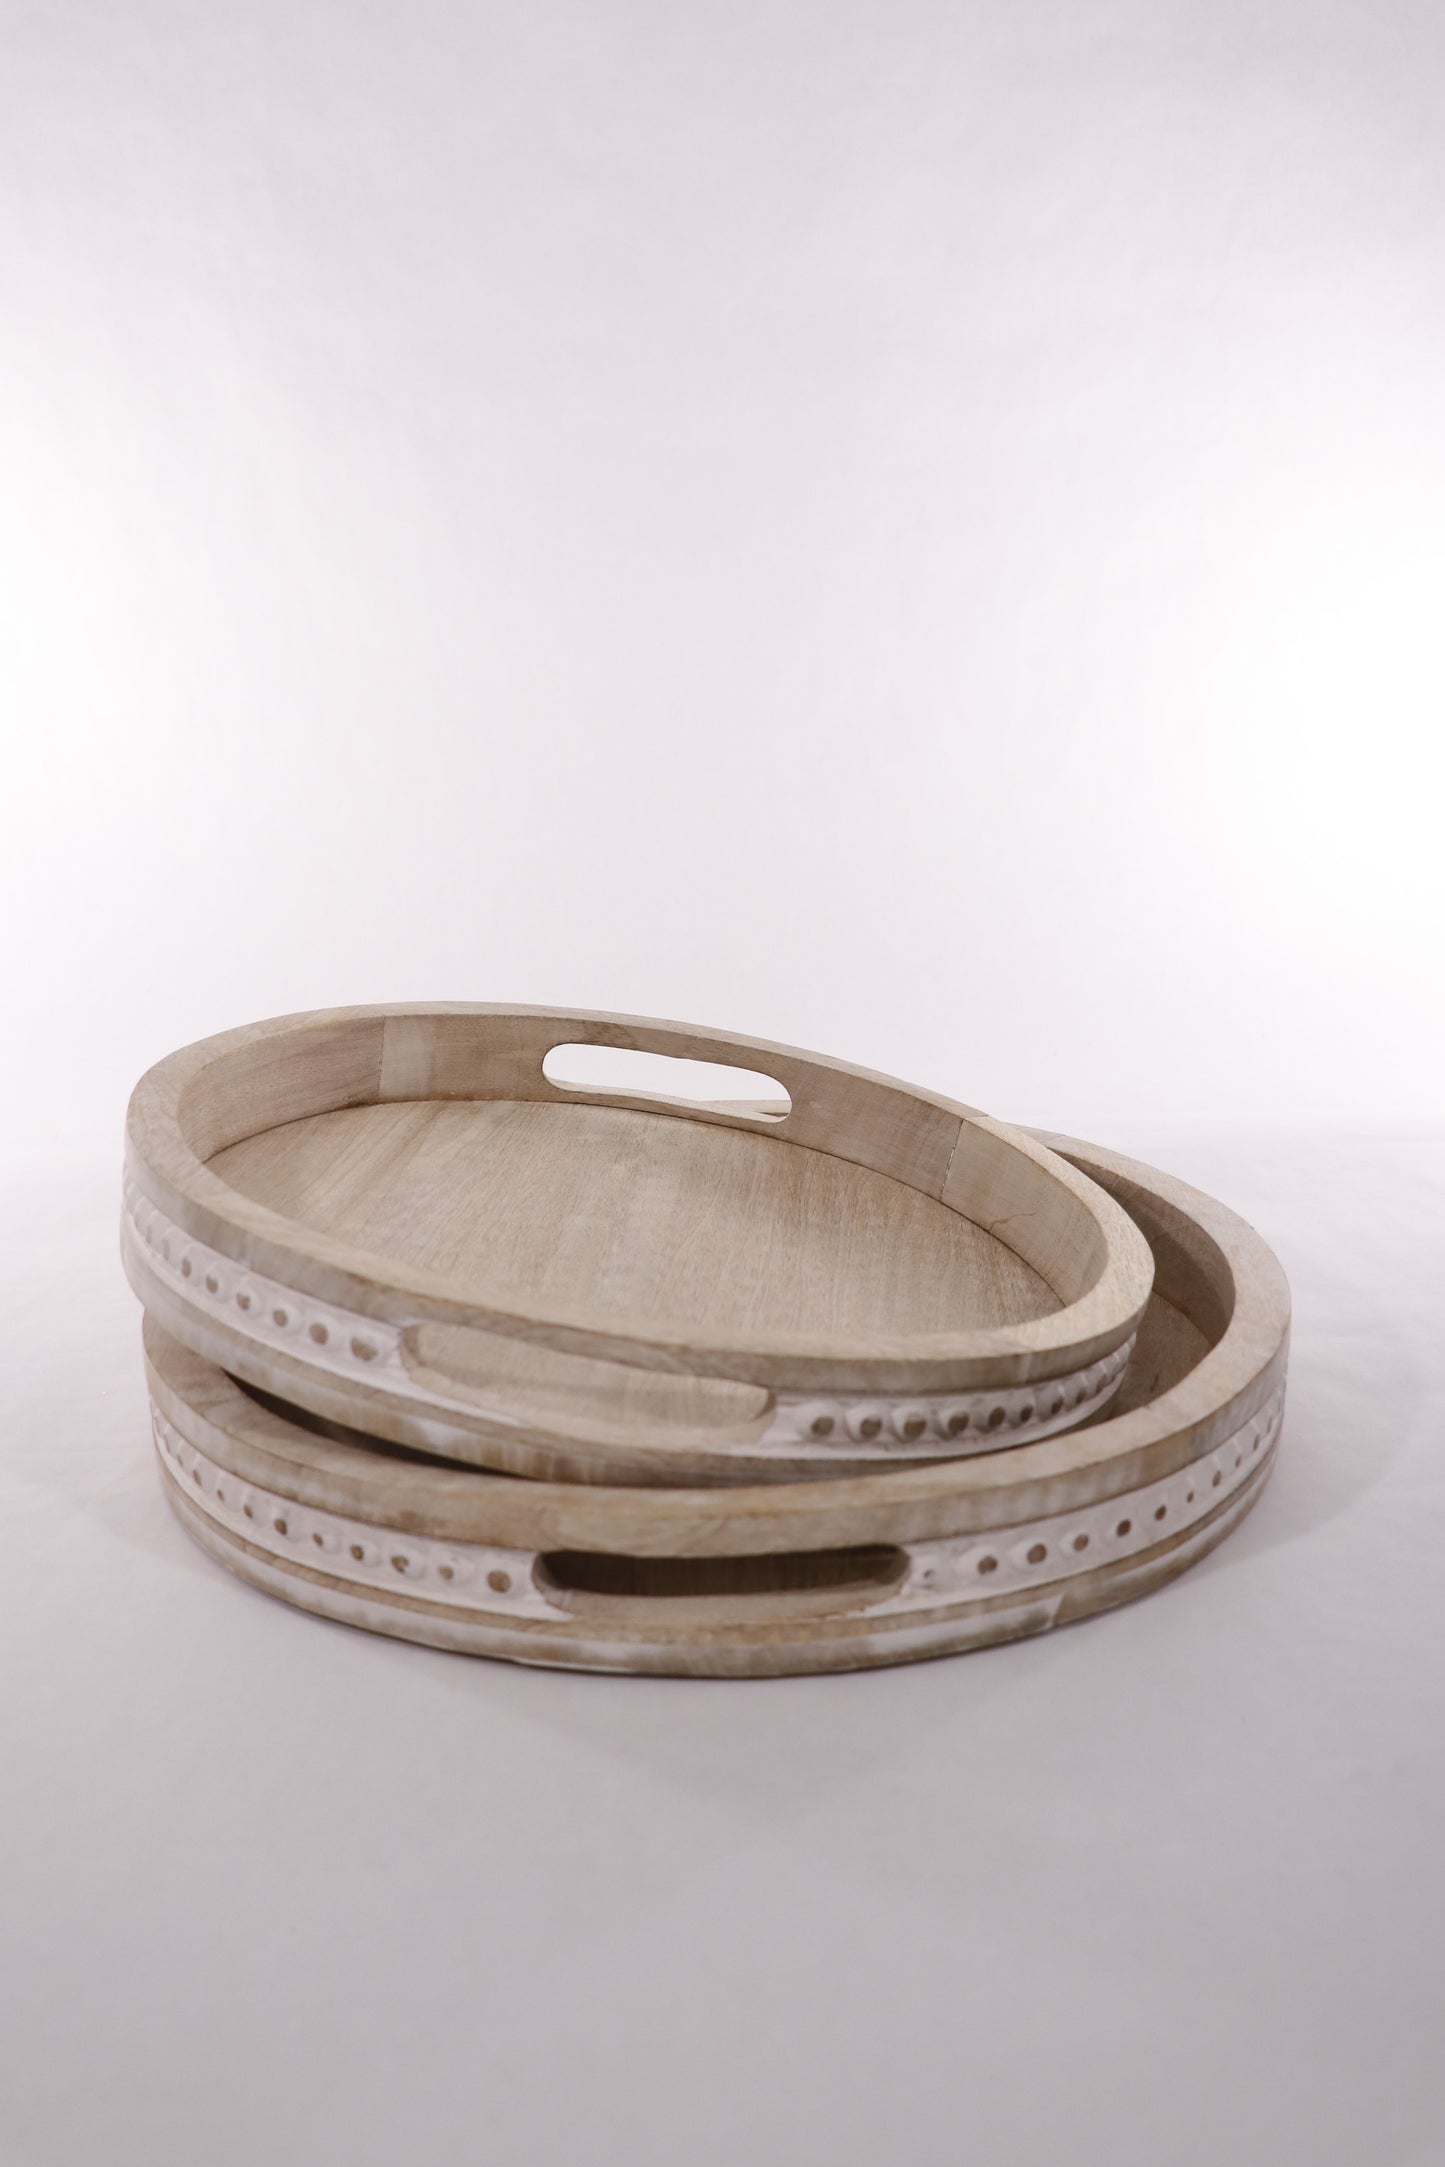 Round wood serving trays with handles